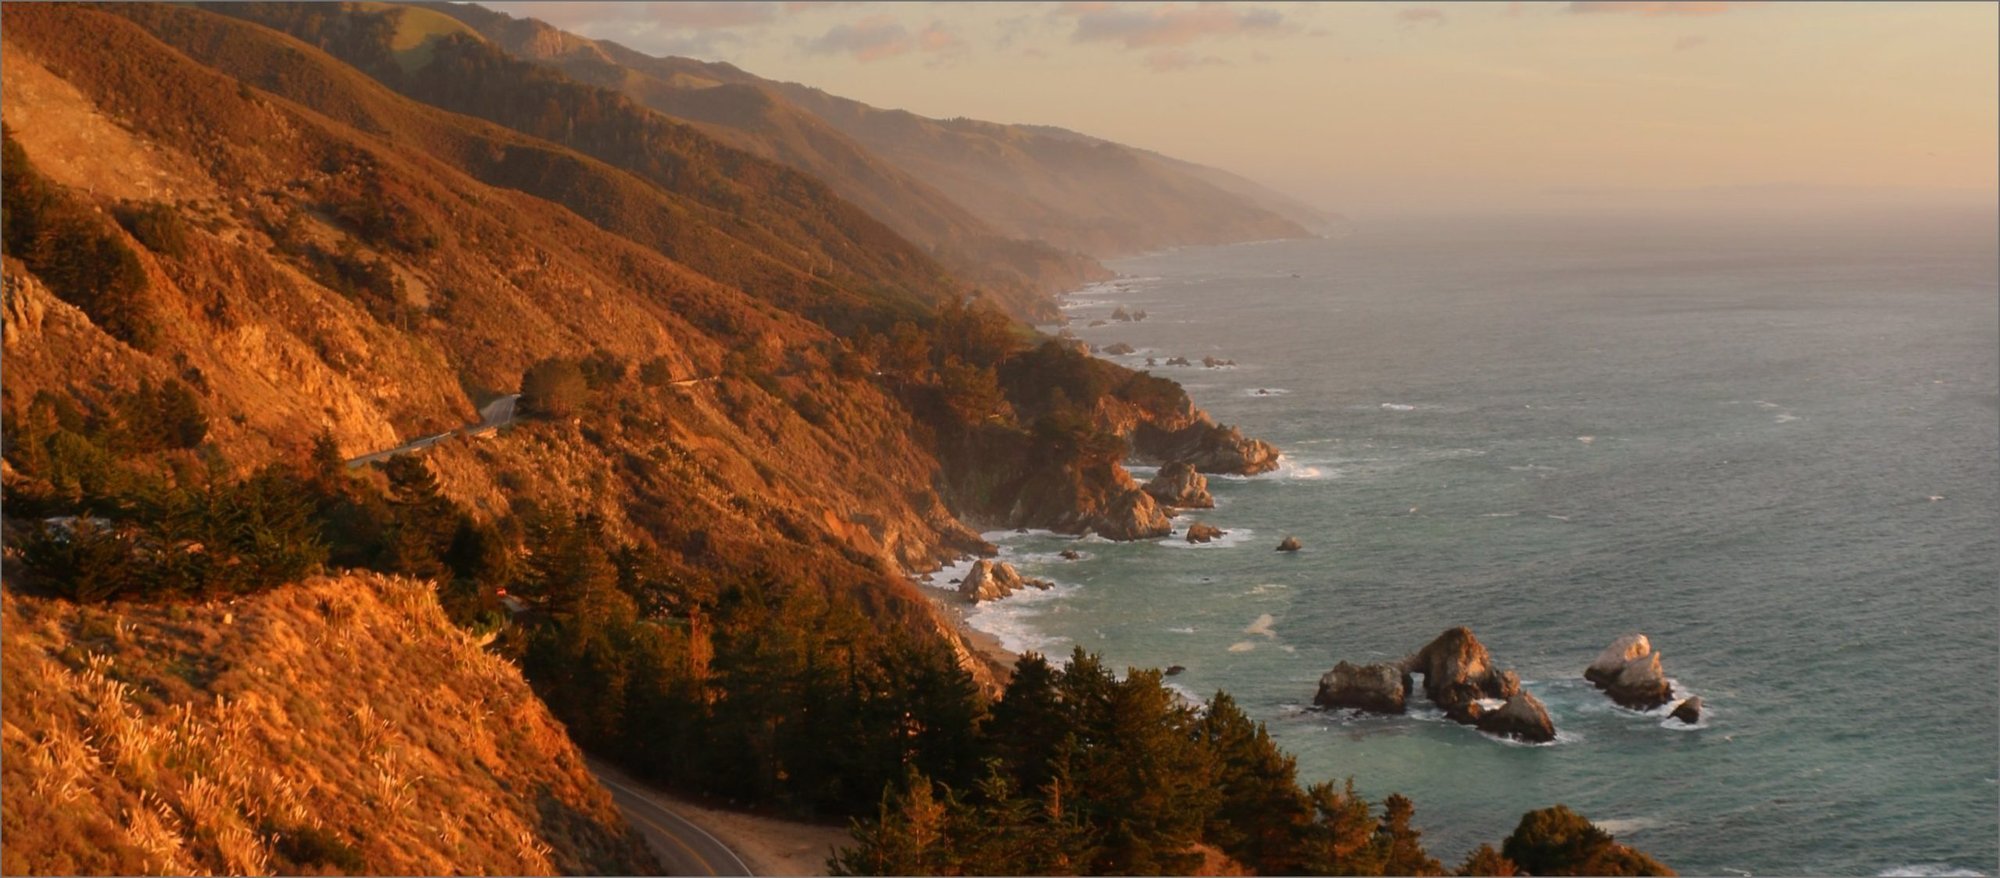 bigsur-at-2x-compressed-scaled